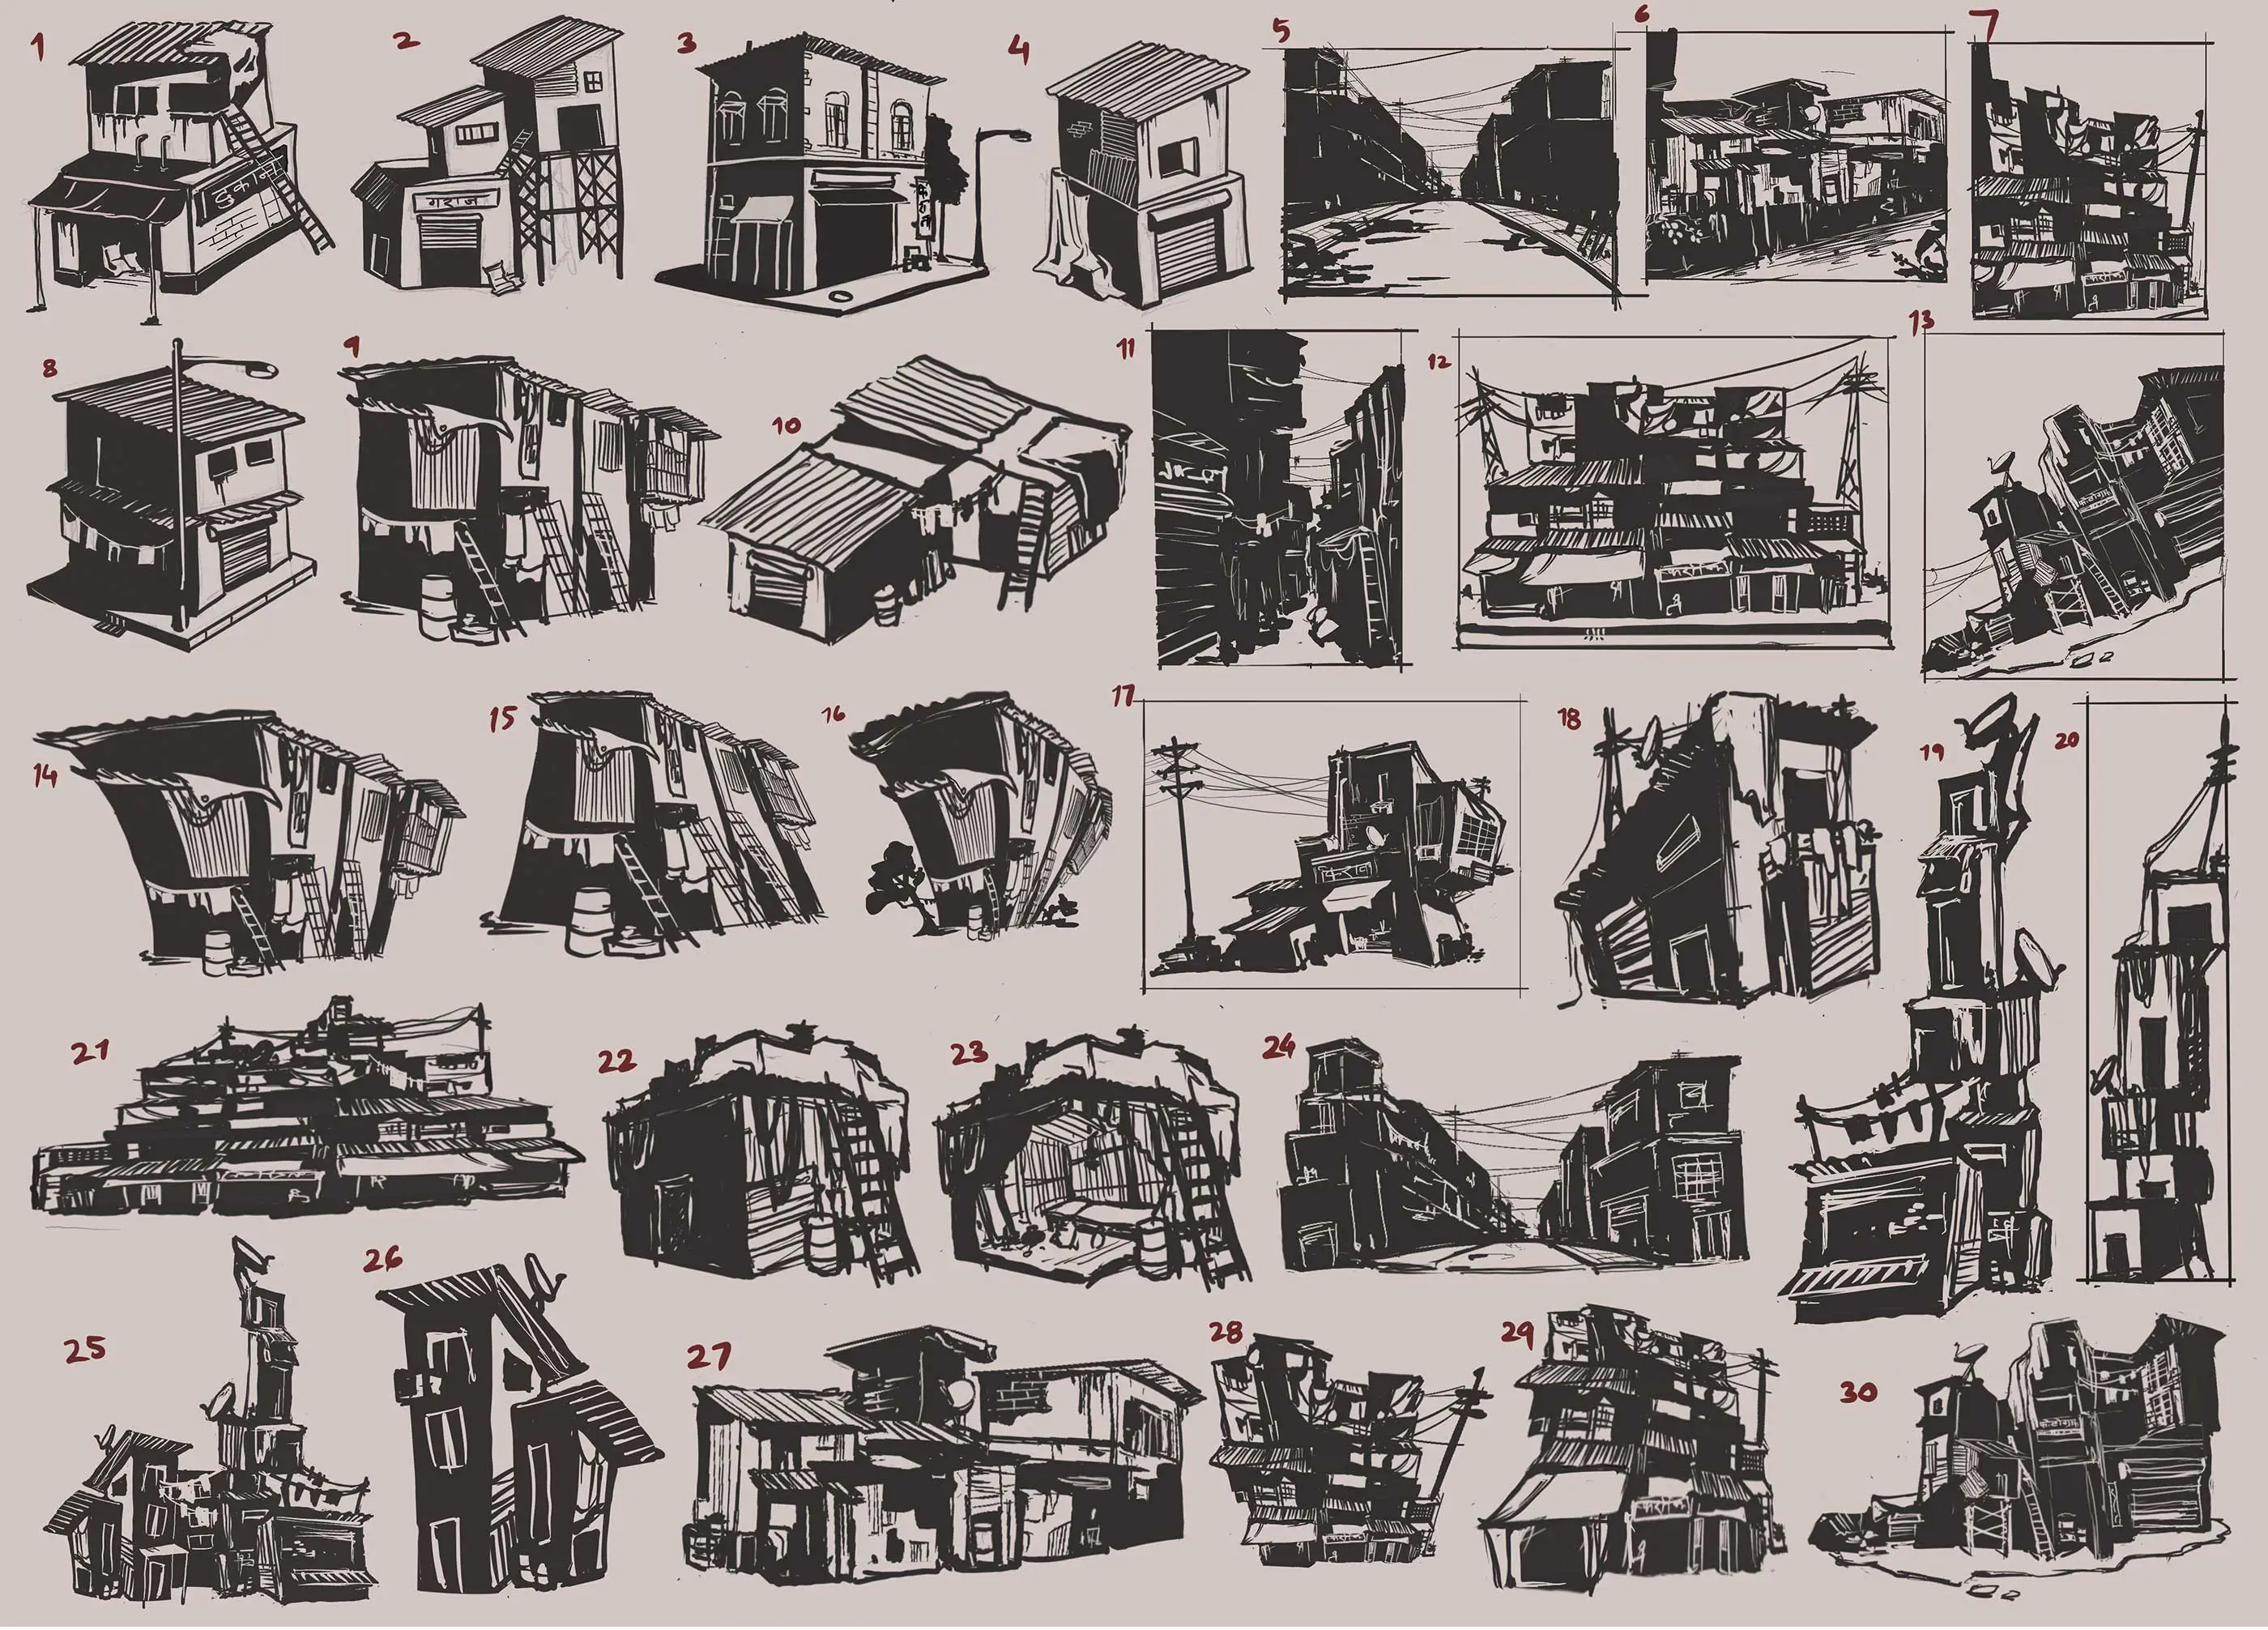 A collection of sketches depicting various shack like structures.